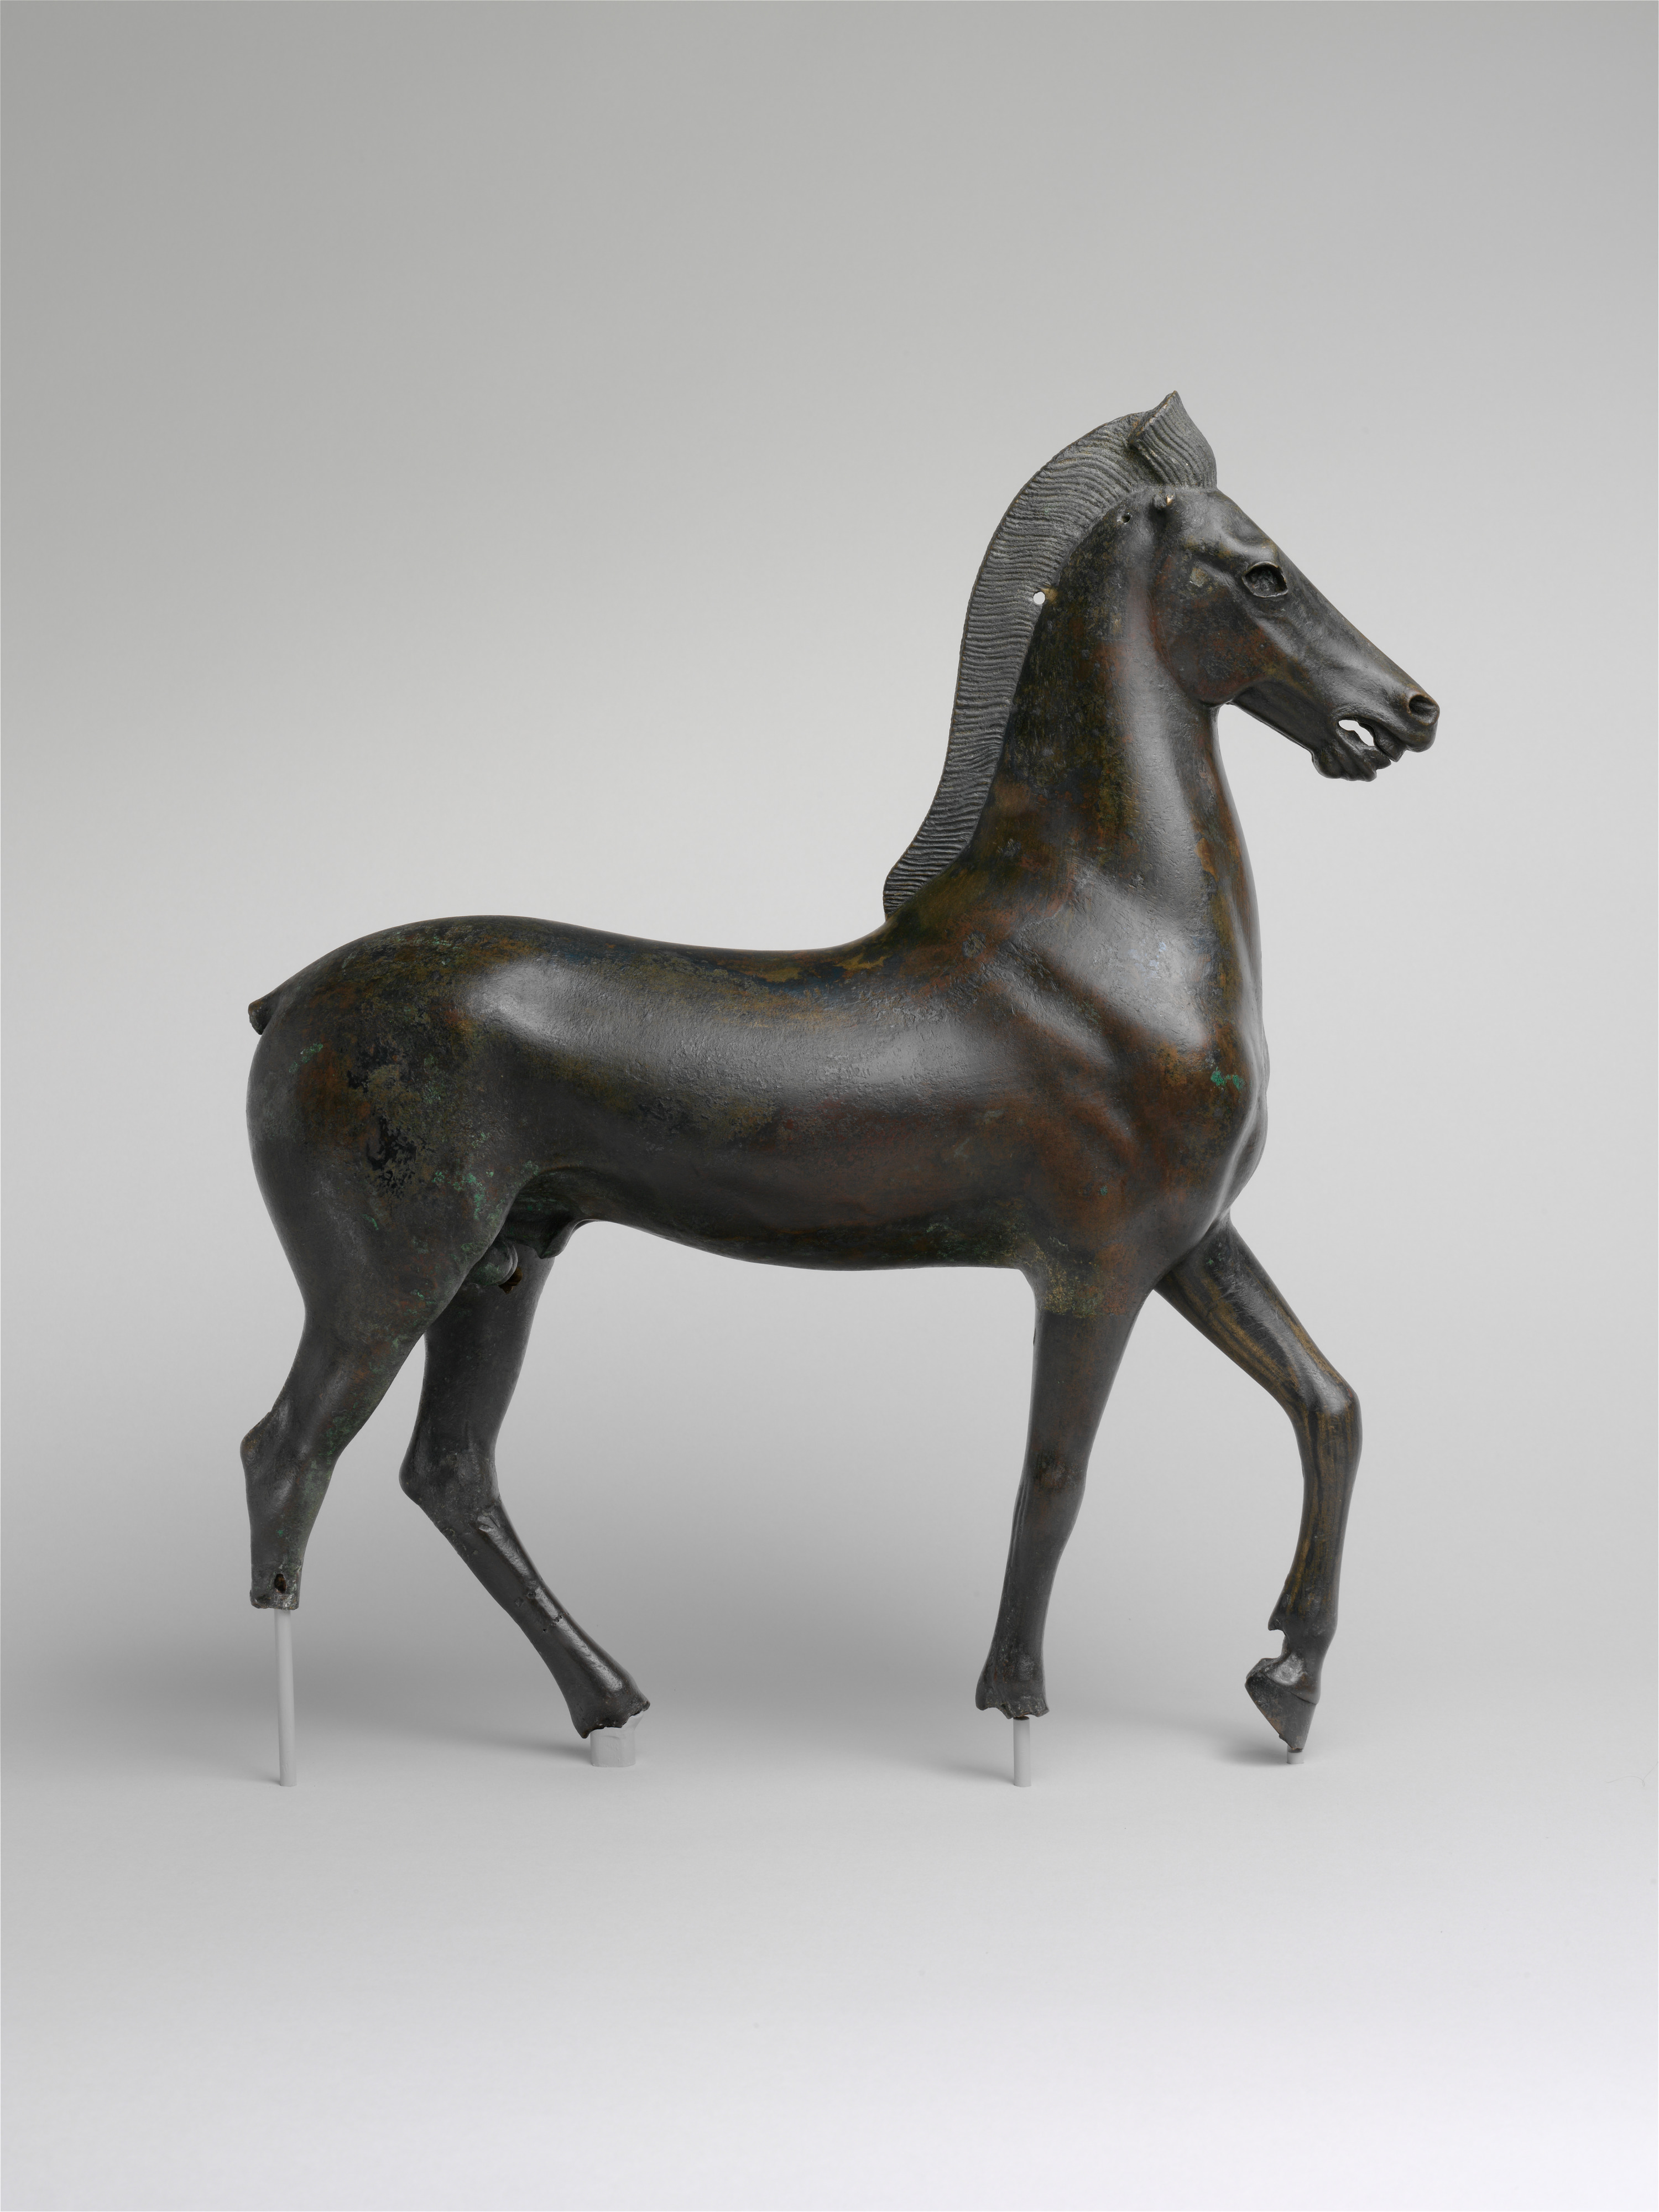 Bronze statuette of a horse, Greek, Late Hellenistic